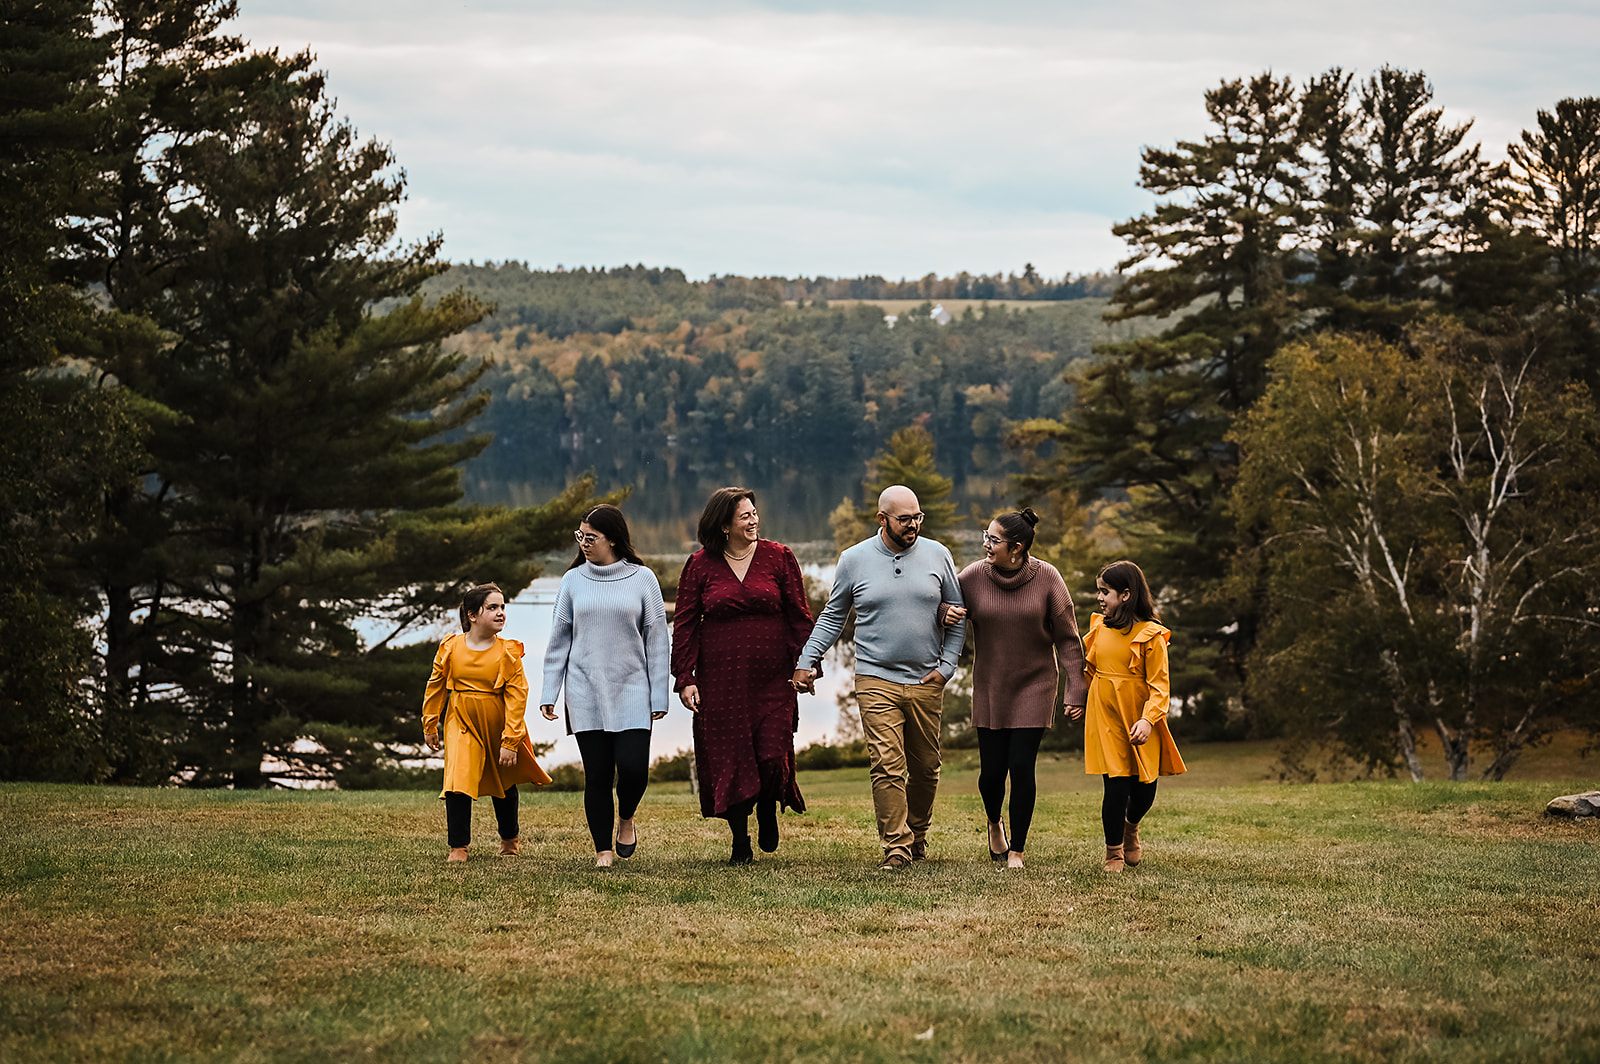 Autumn leaves and the Madore family, please! Our fall family session' is all about cozy sweaters, warm laughs, and makin